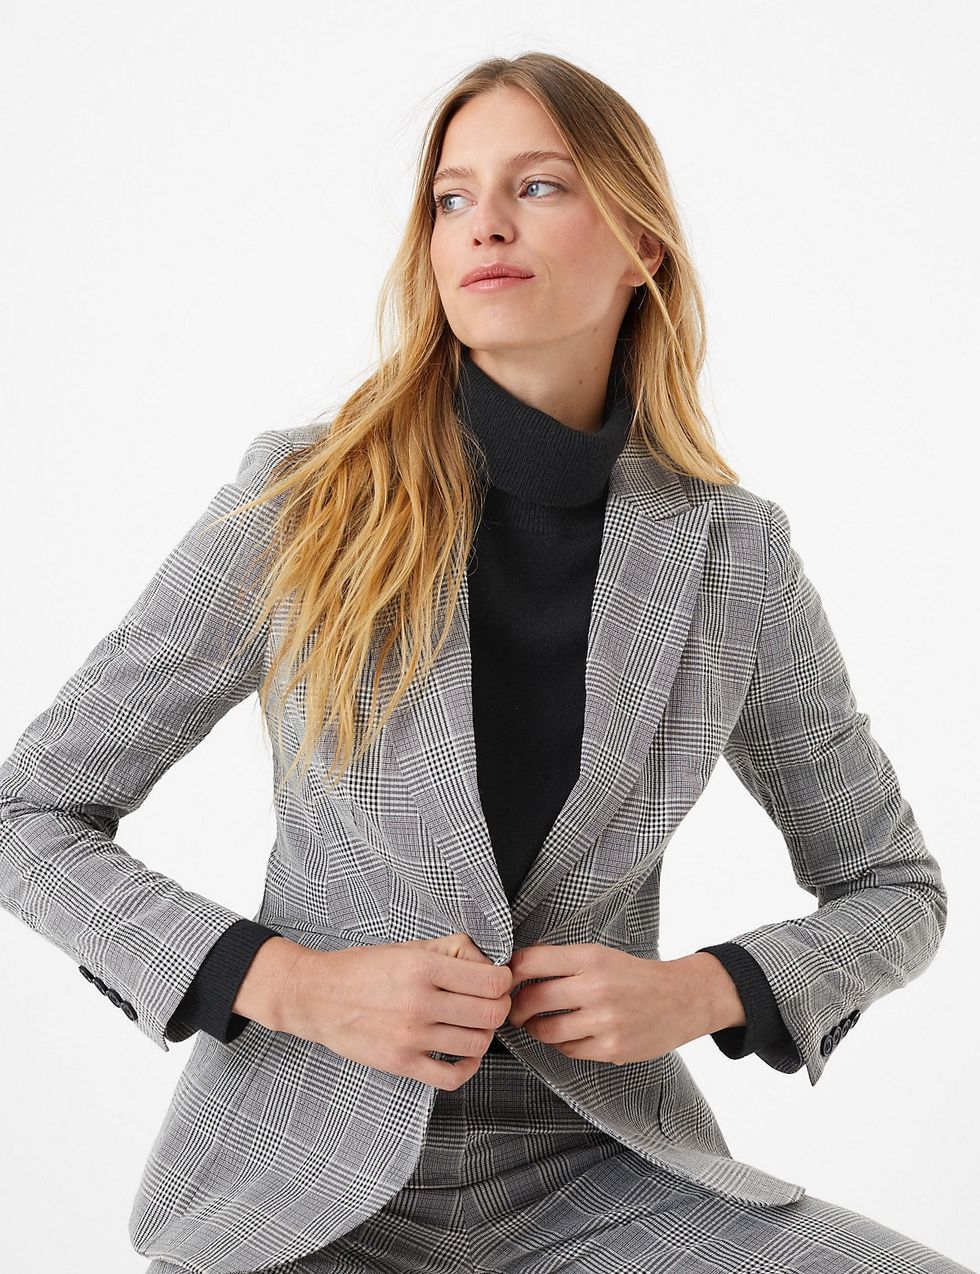 16 of the best workwear buys under £50